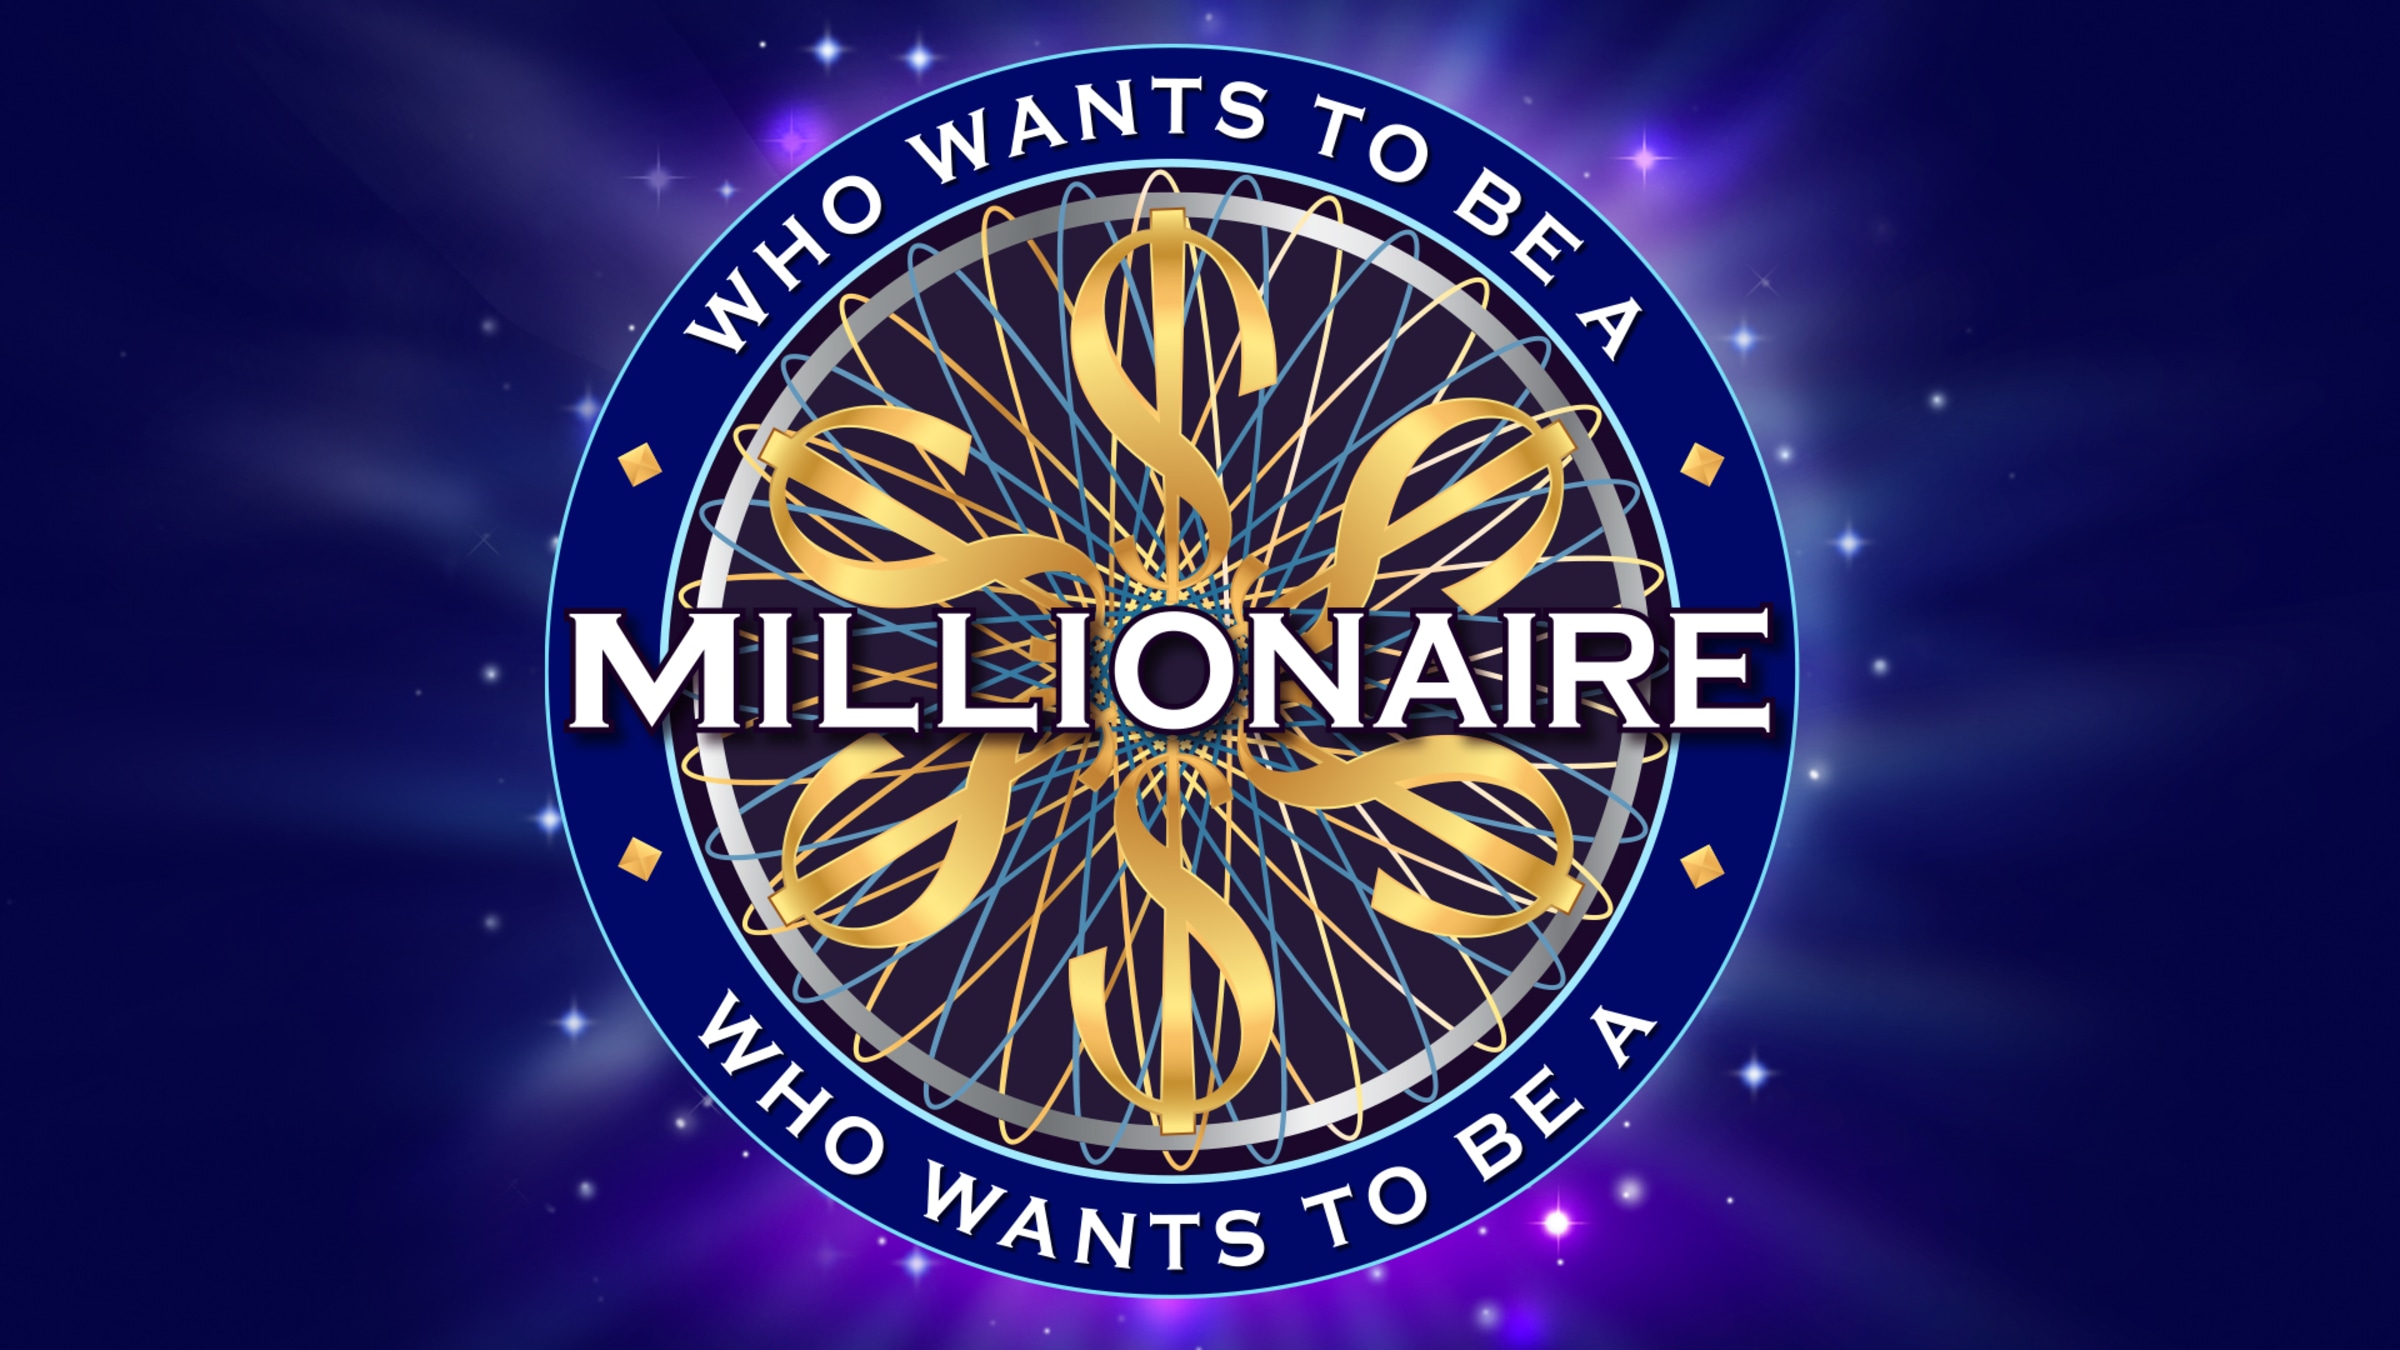 Who Wants to Be a Millionaire? for Nintendo Switch - Nintendo Official Site